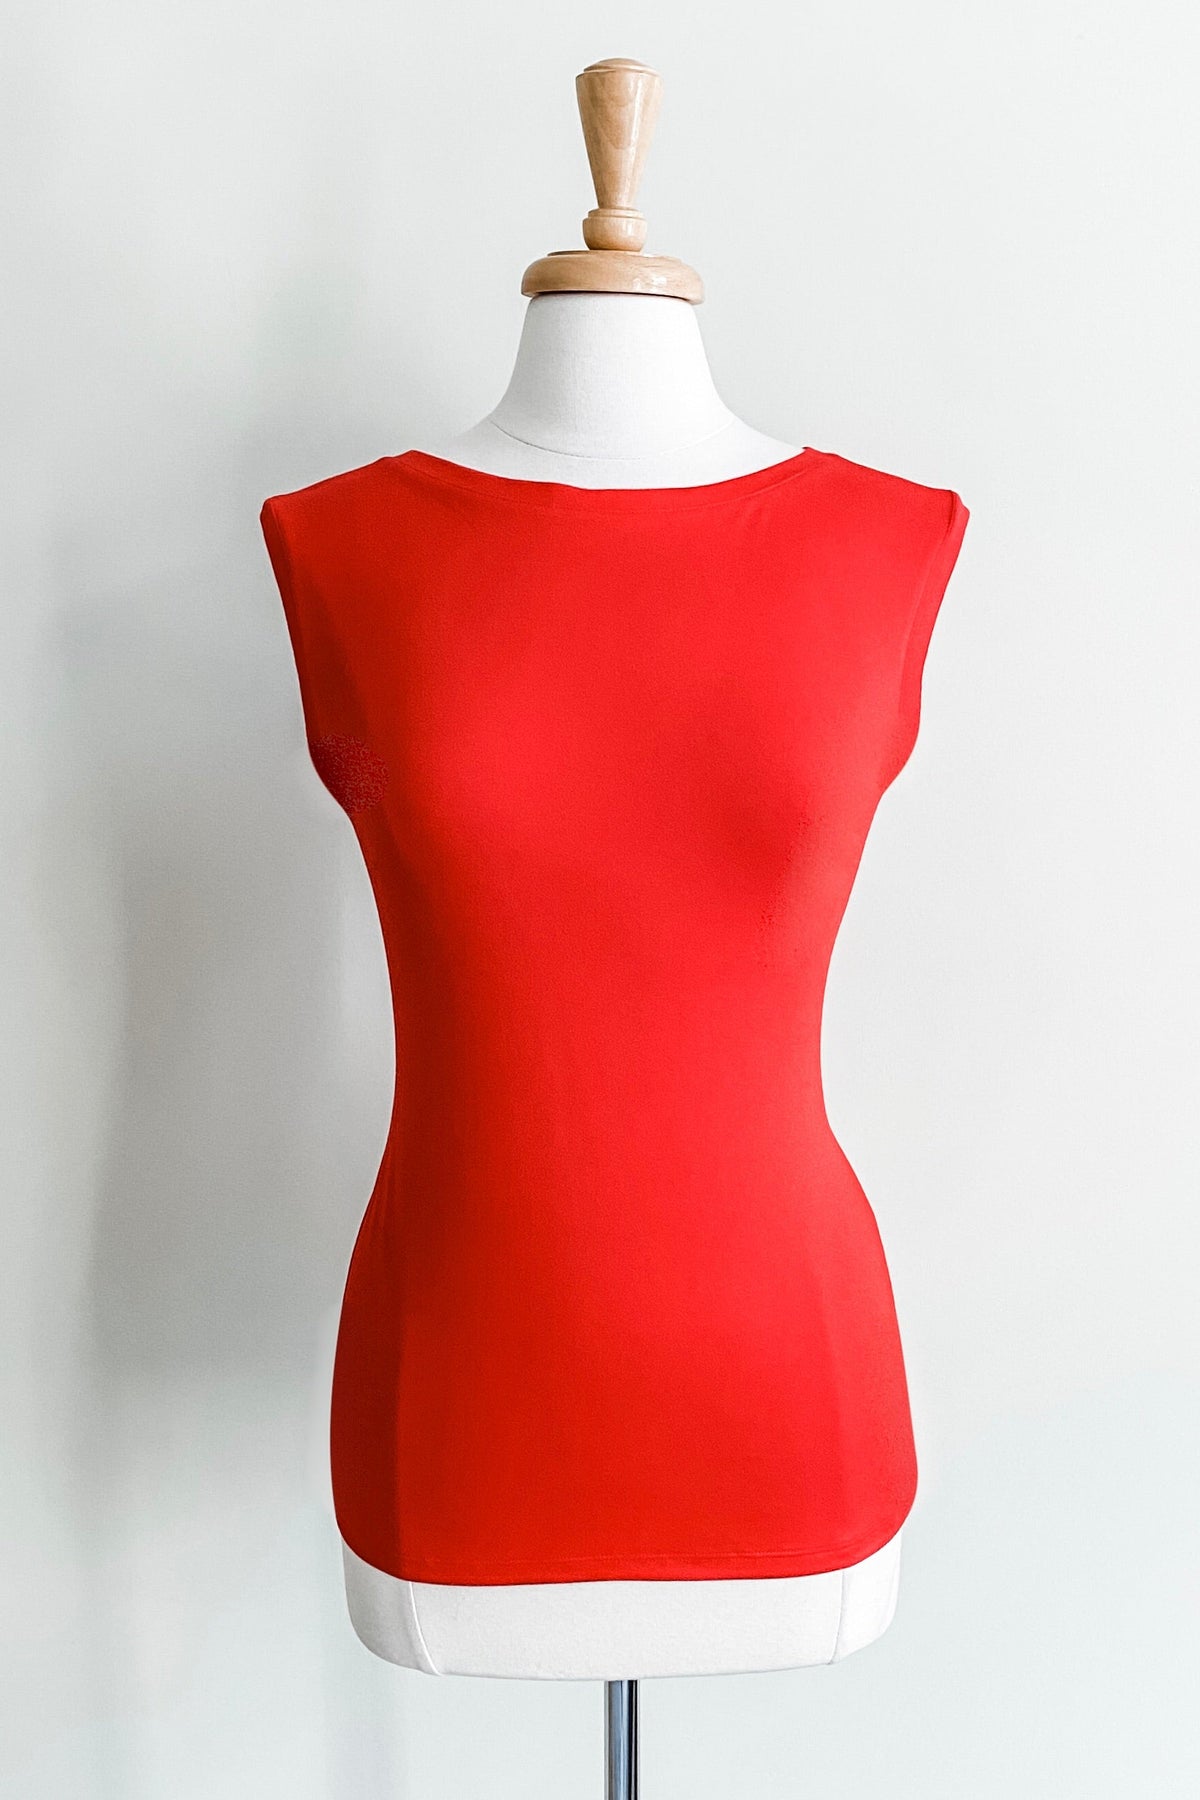 Convertible Cami Top in Fire Red colour